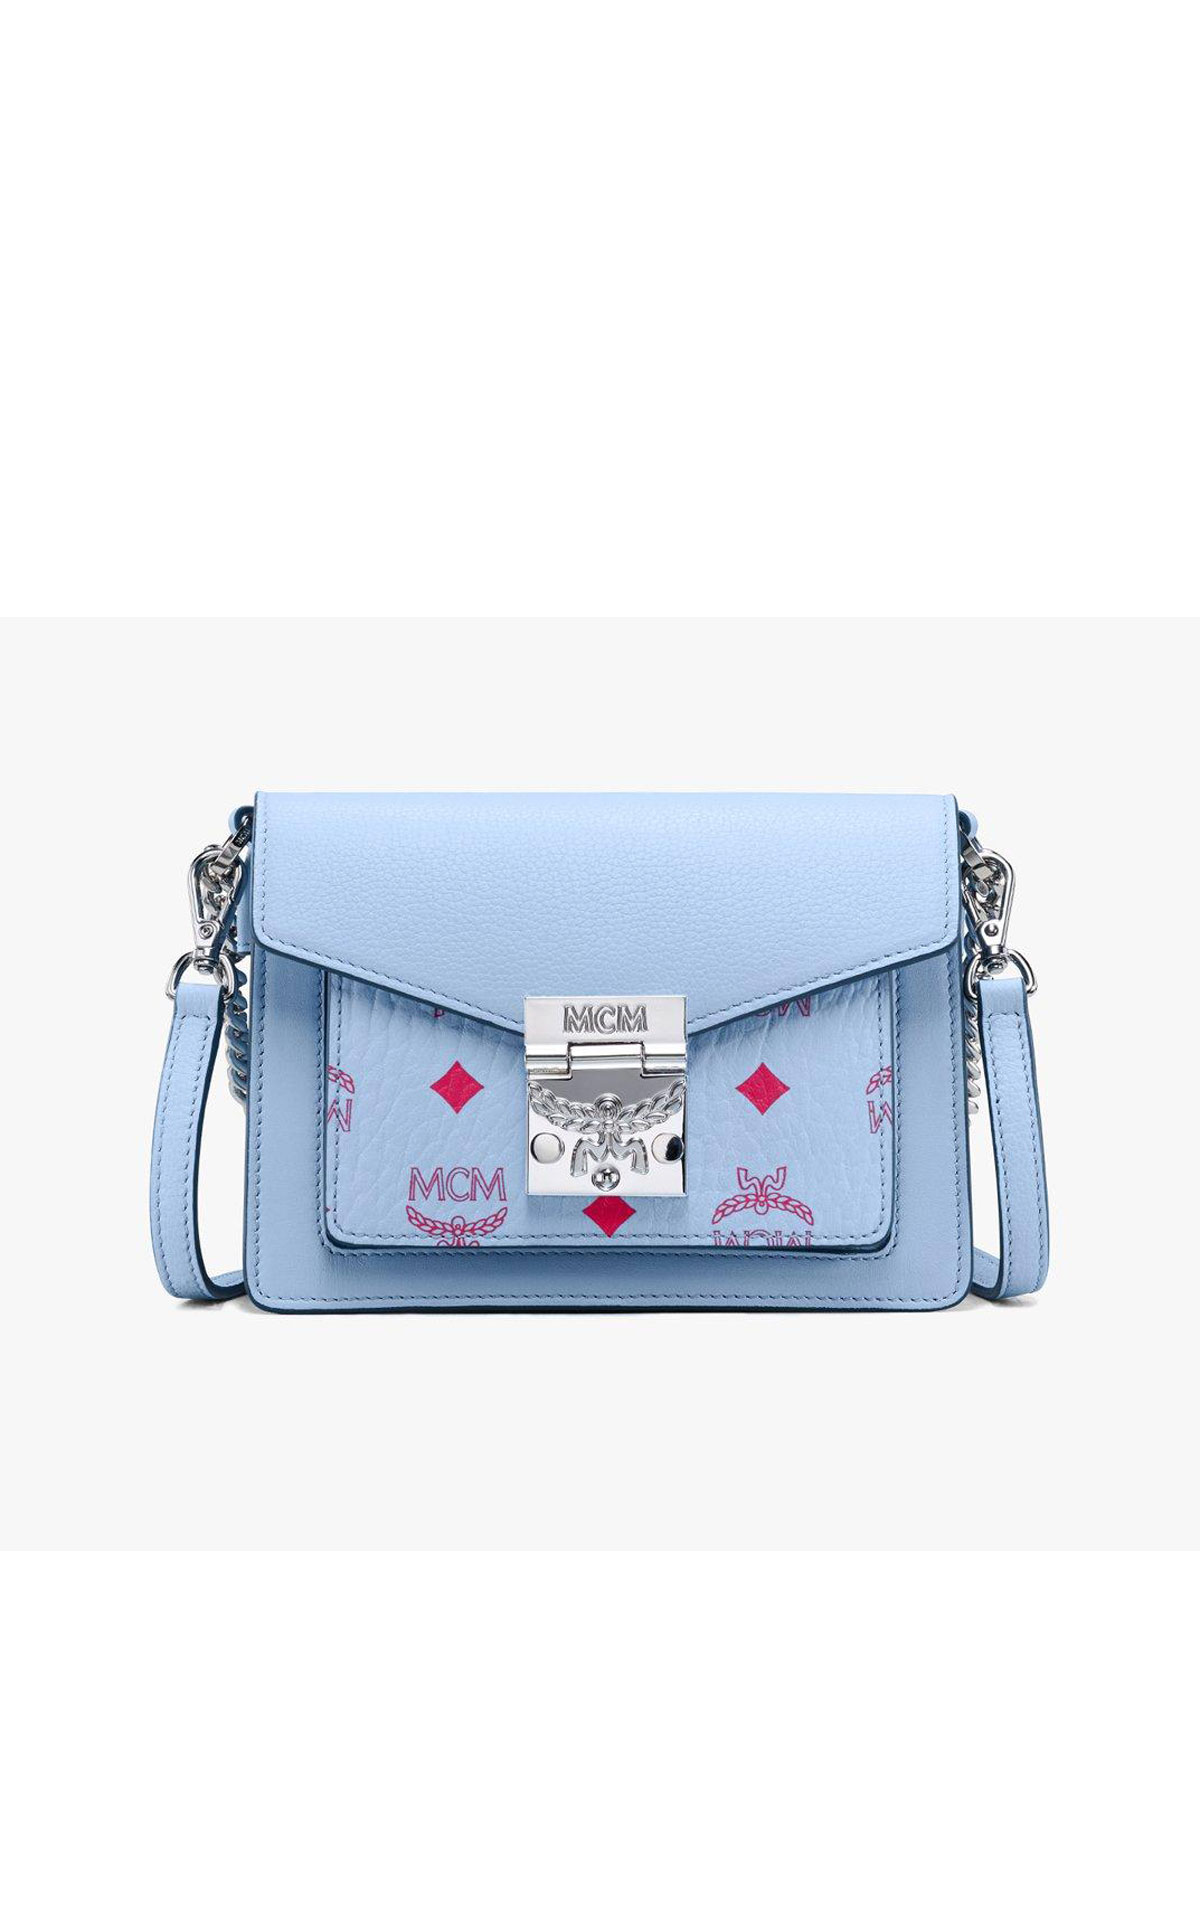 MCM Patricia visetos blue ball from Bicester Village